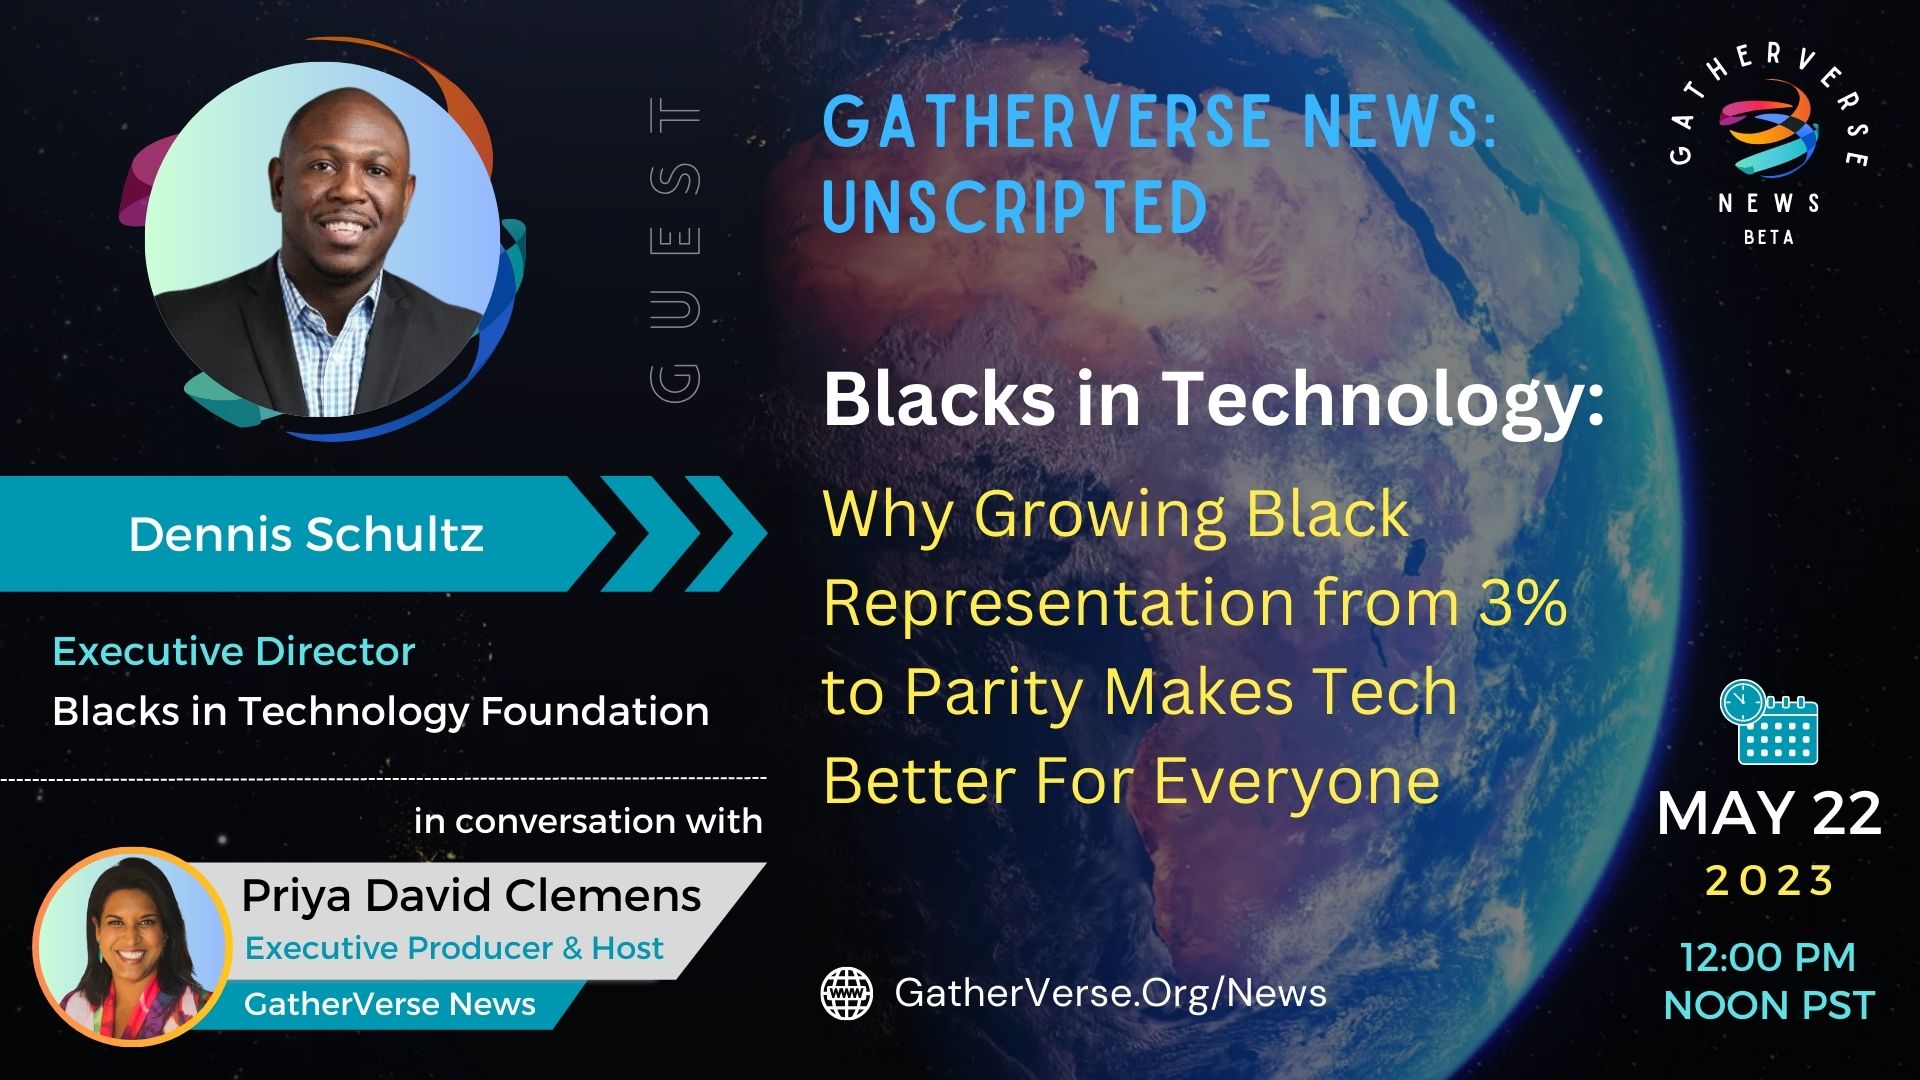 Dennis Schultz-Blacks in Technology-Why Growing Black Representation from 3% to Parity Makes Tech Better For Everyone